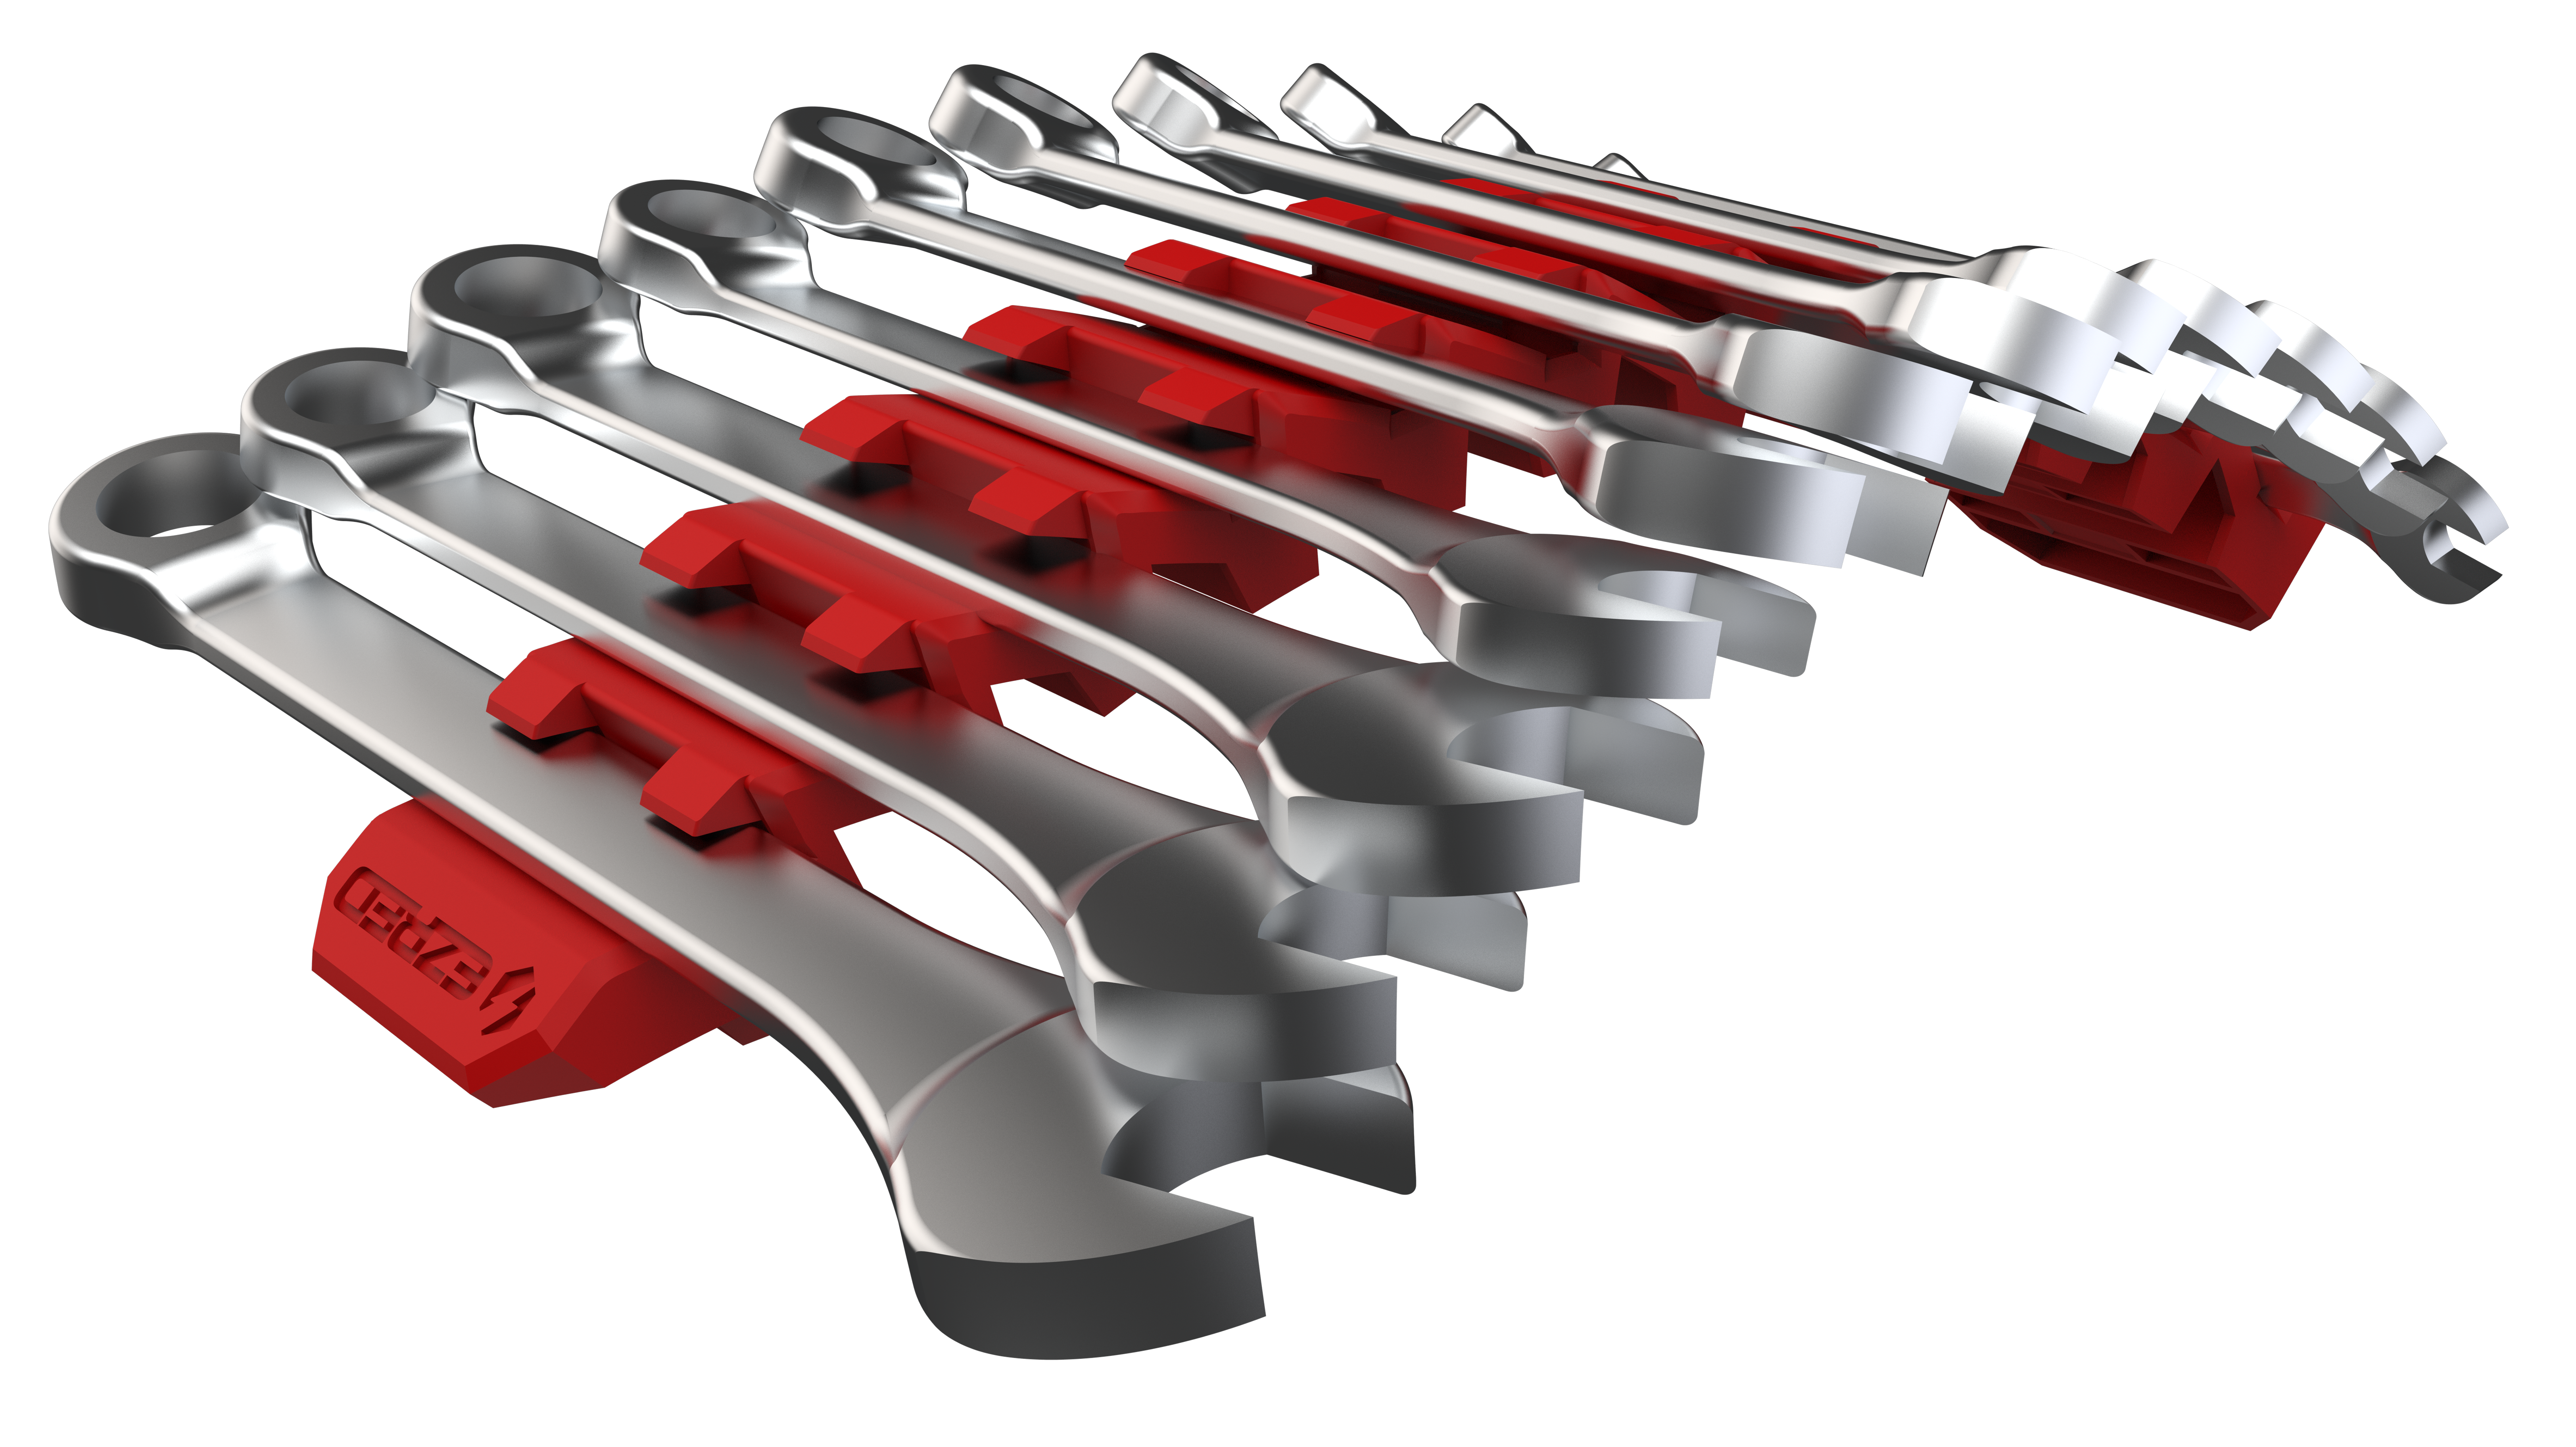 https://ezred.com/wp-content/uploads/2022/02/EZRED-FWR12-R-FLEXIBLE-MAGNETIC-WRENCH-RACK-RED-5.png